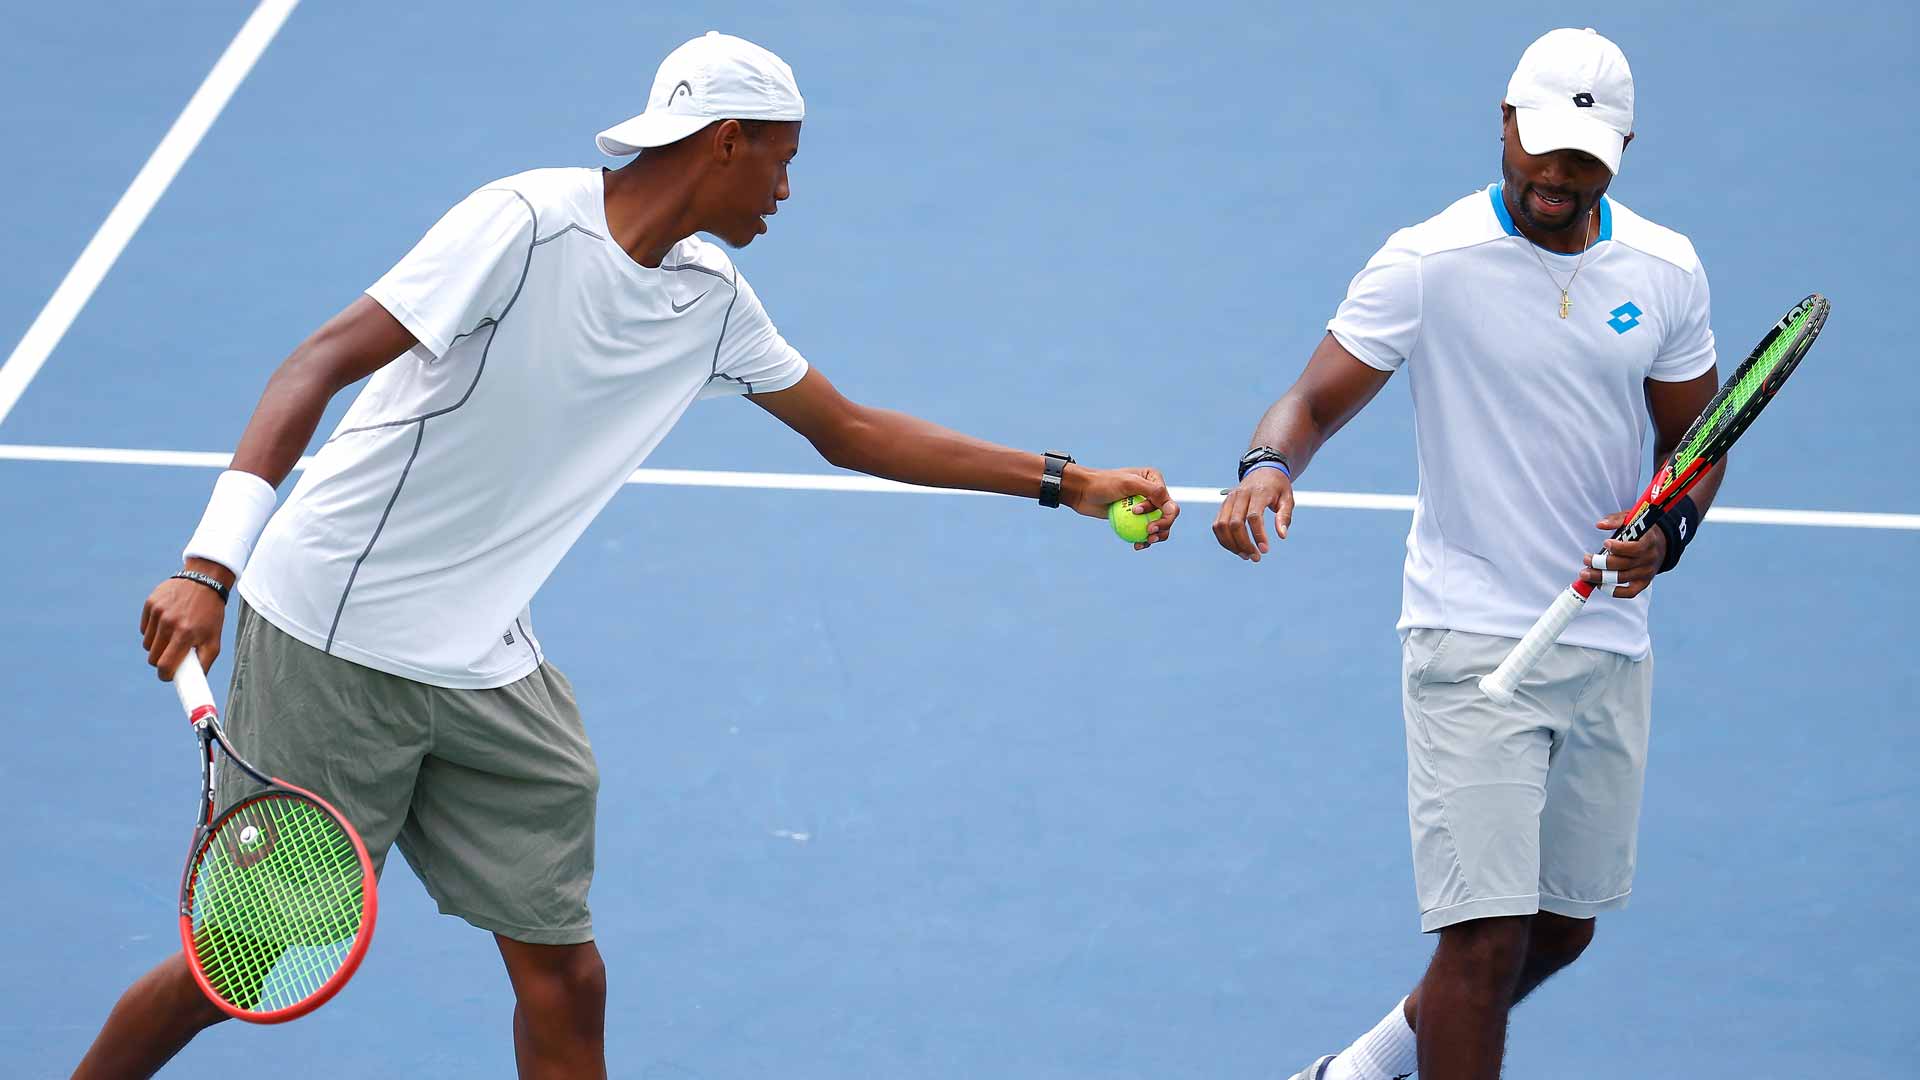 <a href='https://www.atptour.com/en/players/christopher-eubanks/e865/overview'>Christopher Eubanks</a> and <a href='https://www.atptour.com/en/players/donald-young/y124/overview'>Donald Young</a>